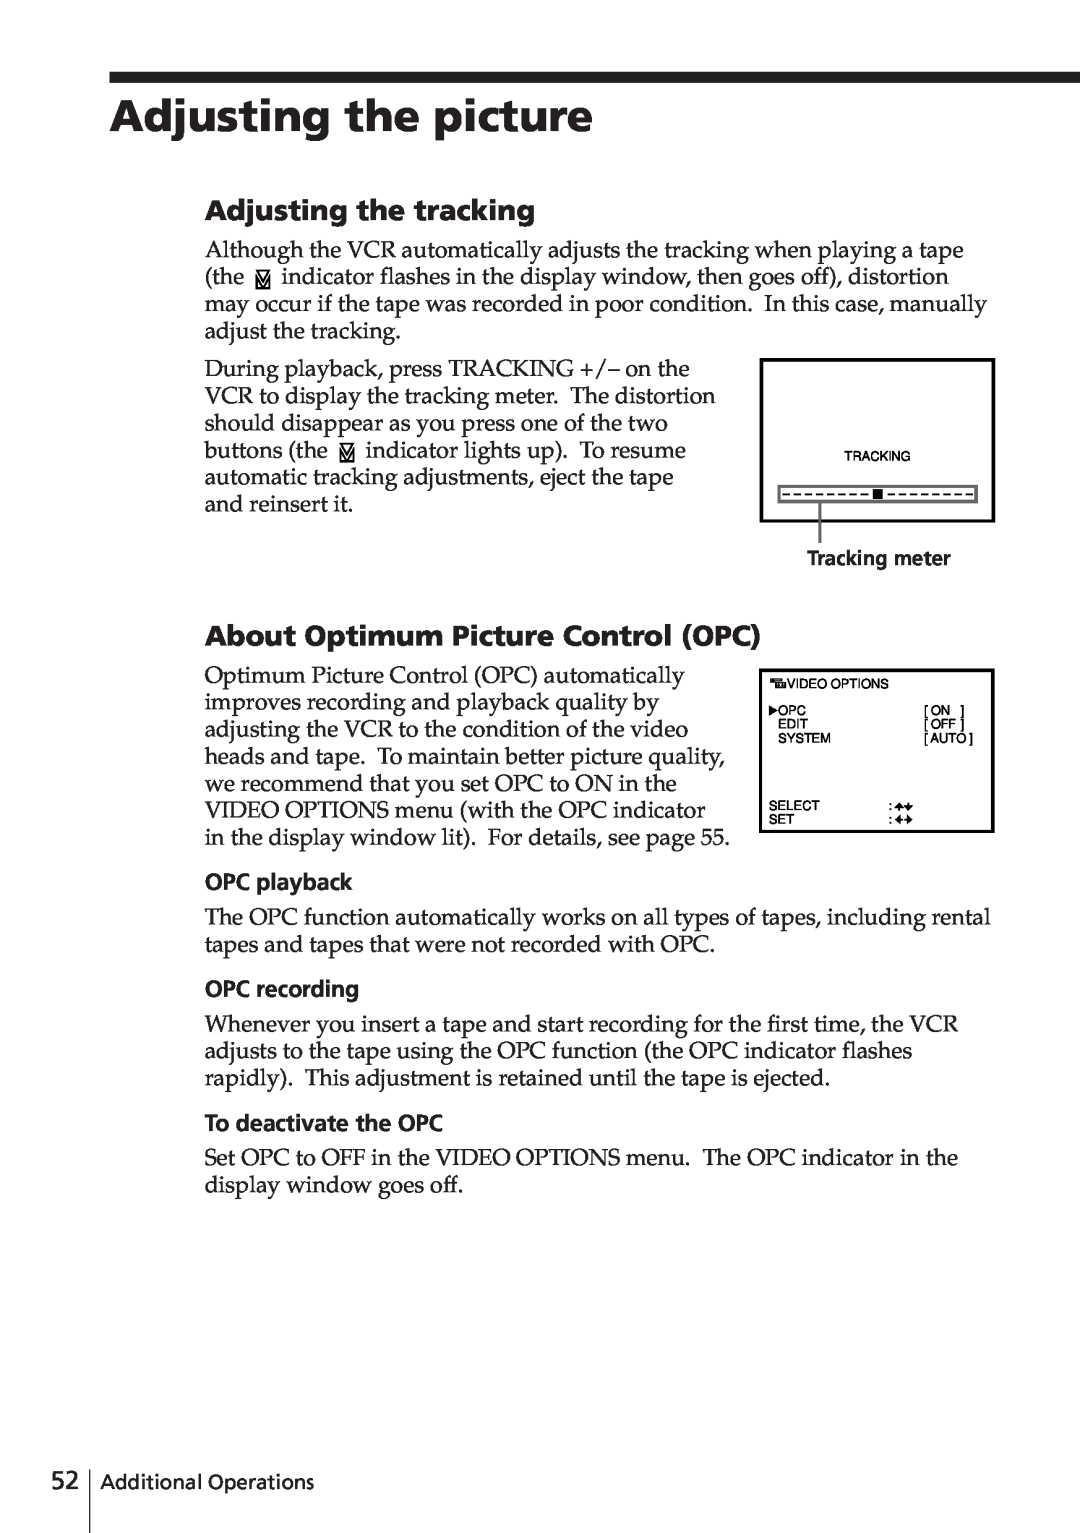 Sony SLV-E580EG manual Adjusting the picture, Adjusting the tracking, About Optimum Picture Control OPC, OPC playback 